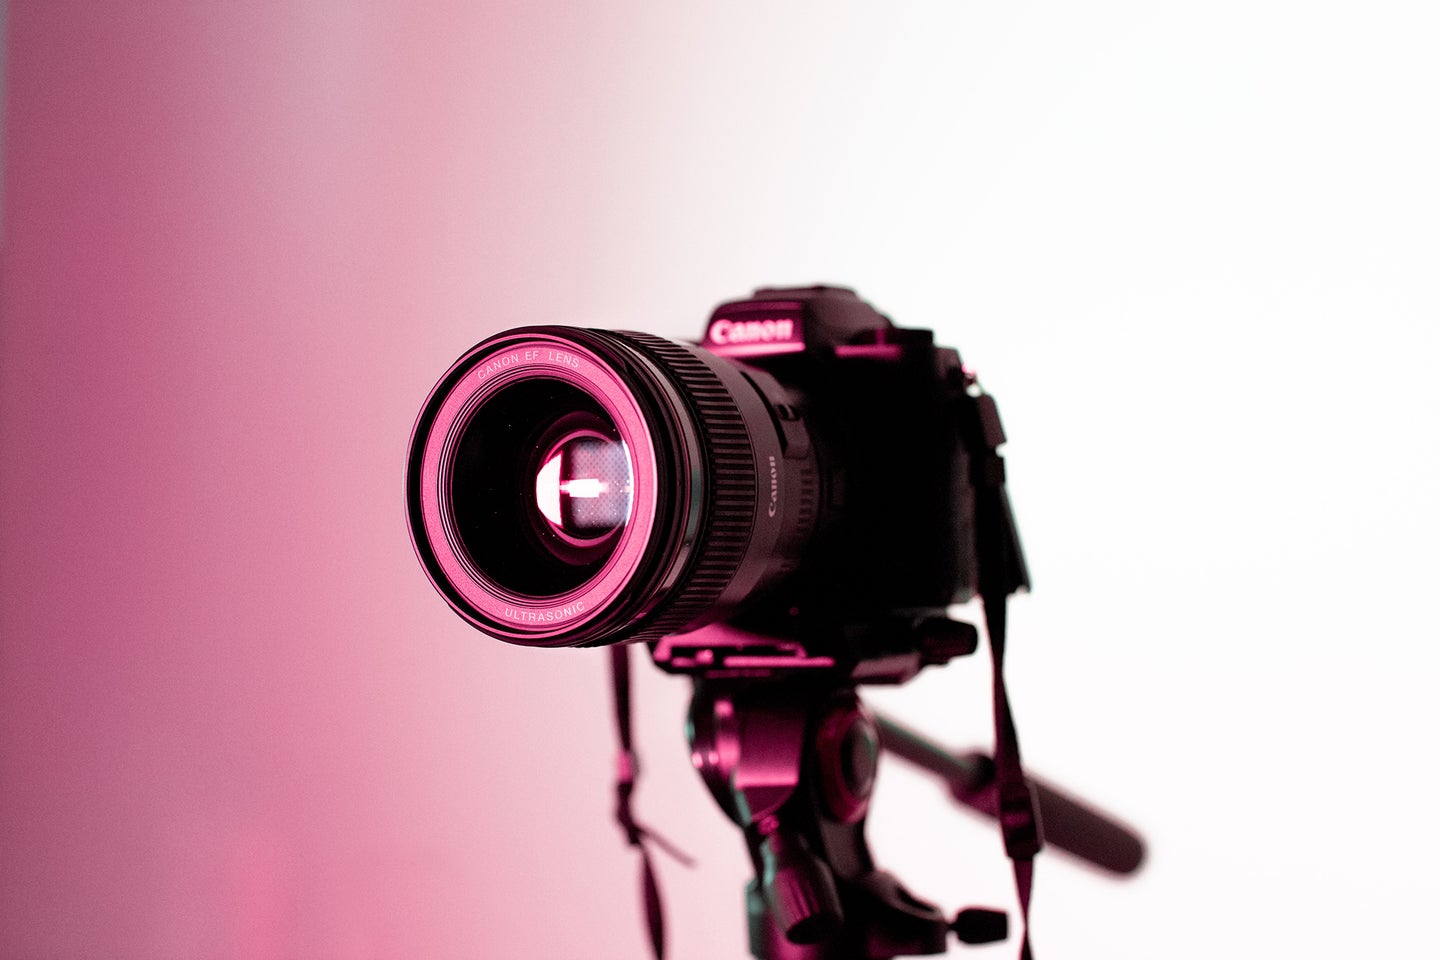 canon camera on a tripod with a pink light